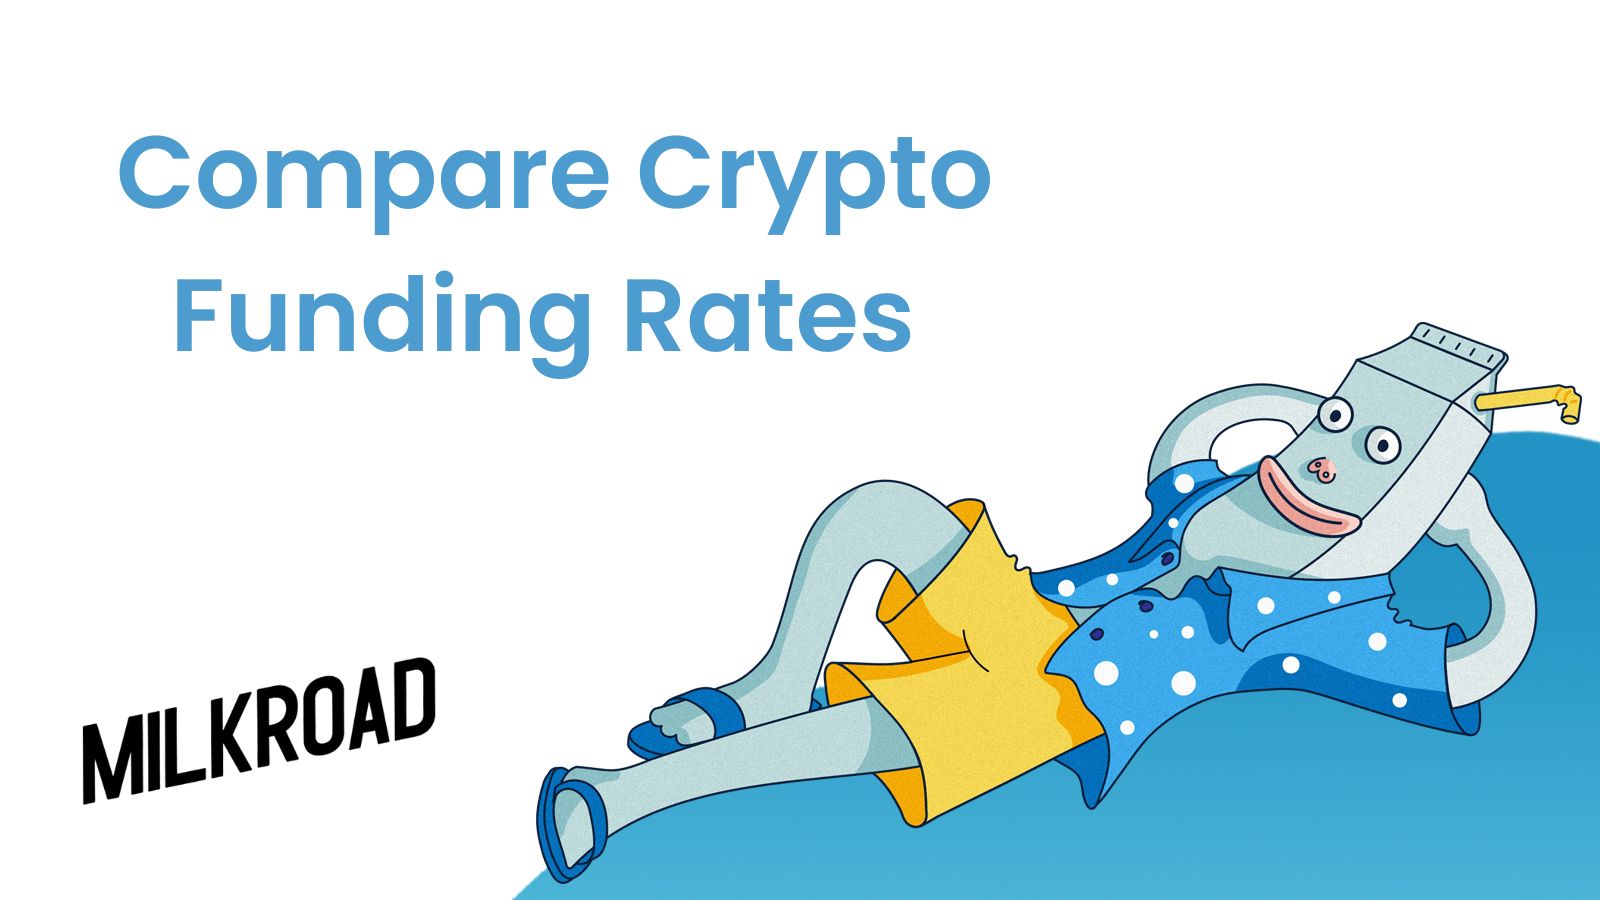 Compare Crypto Funding Rates